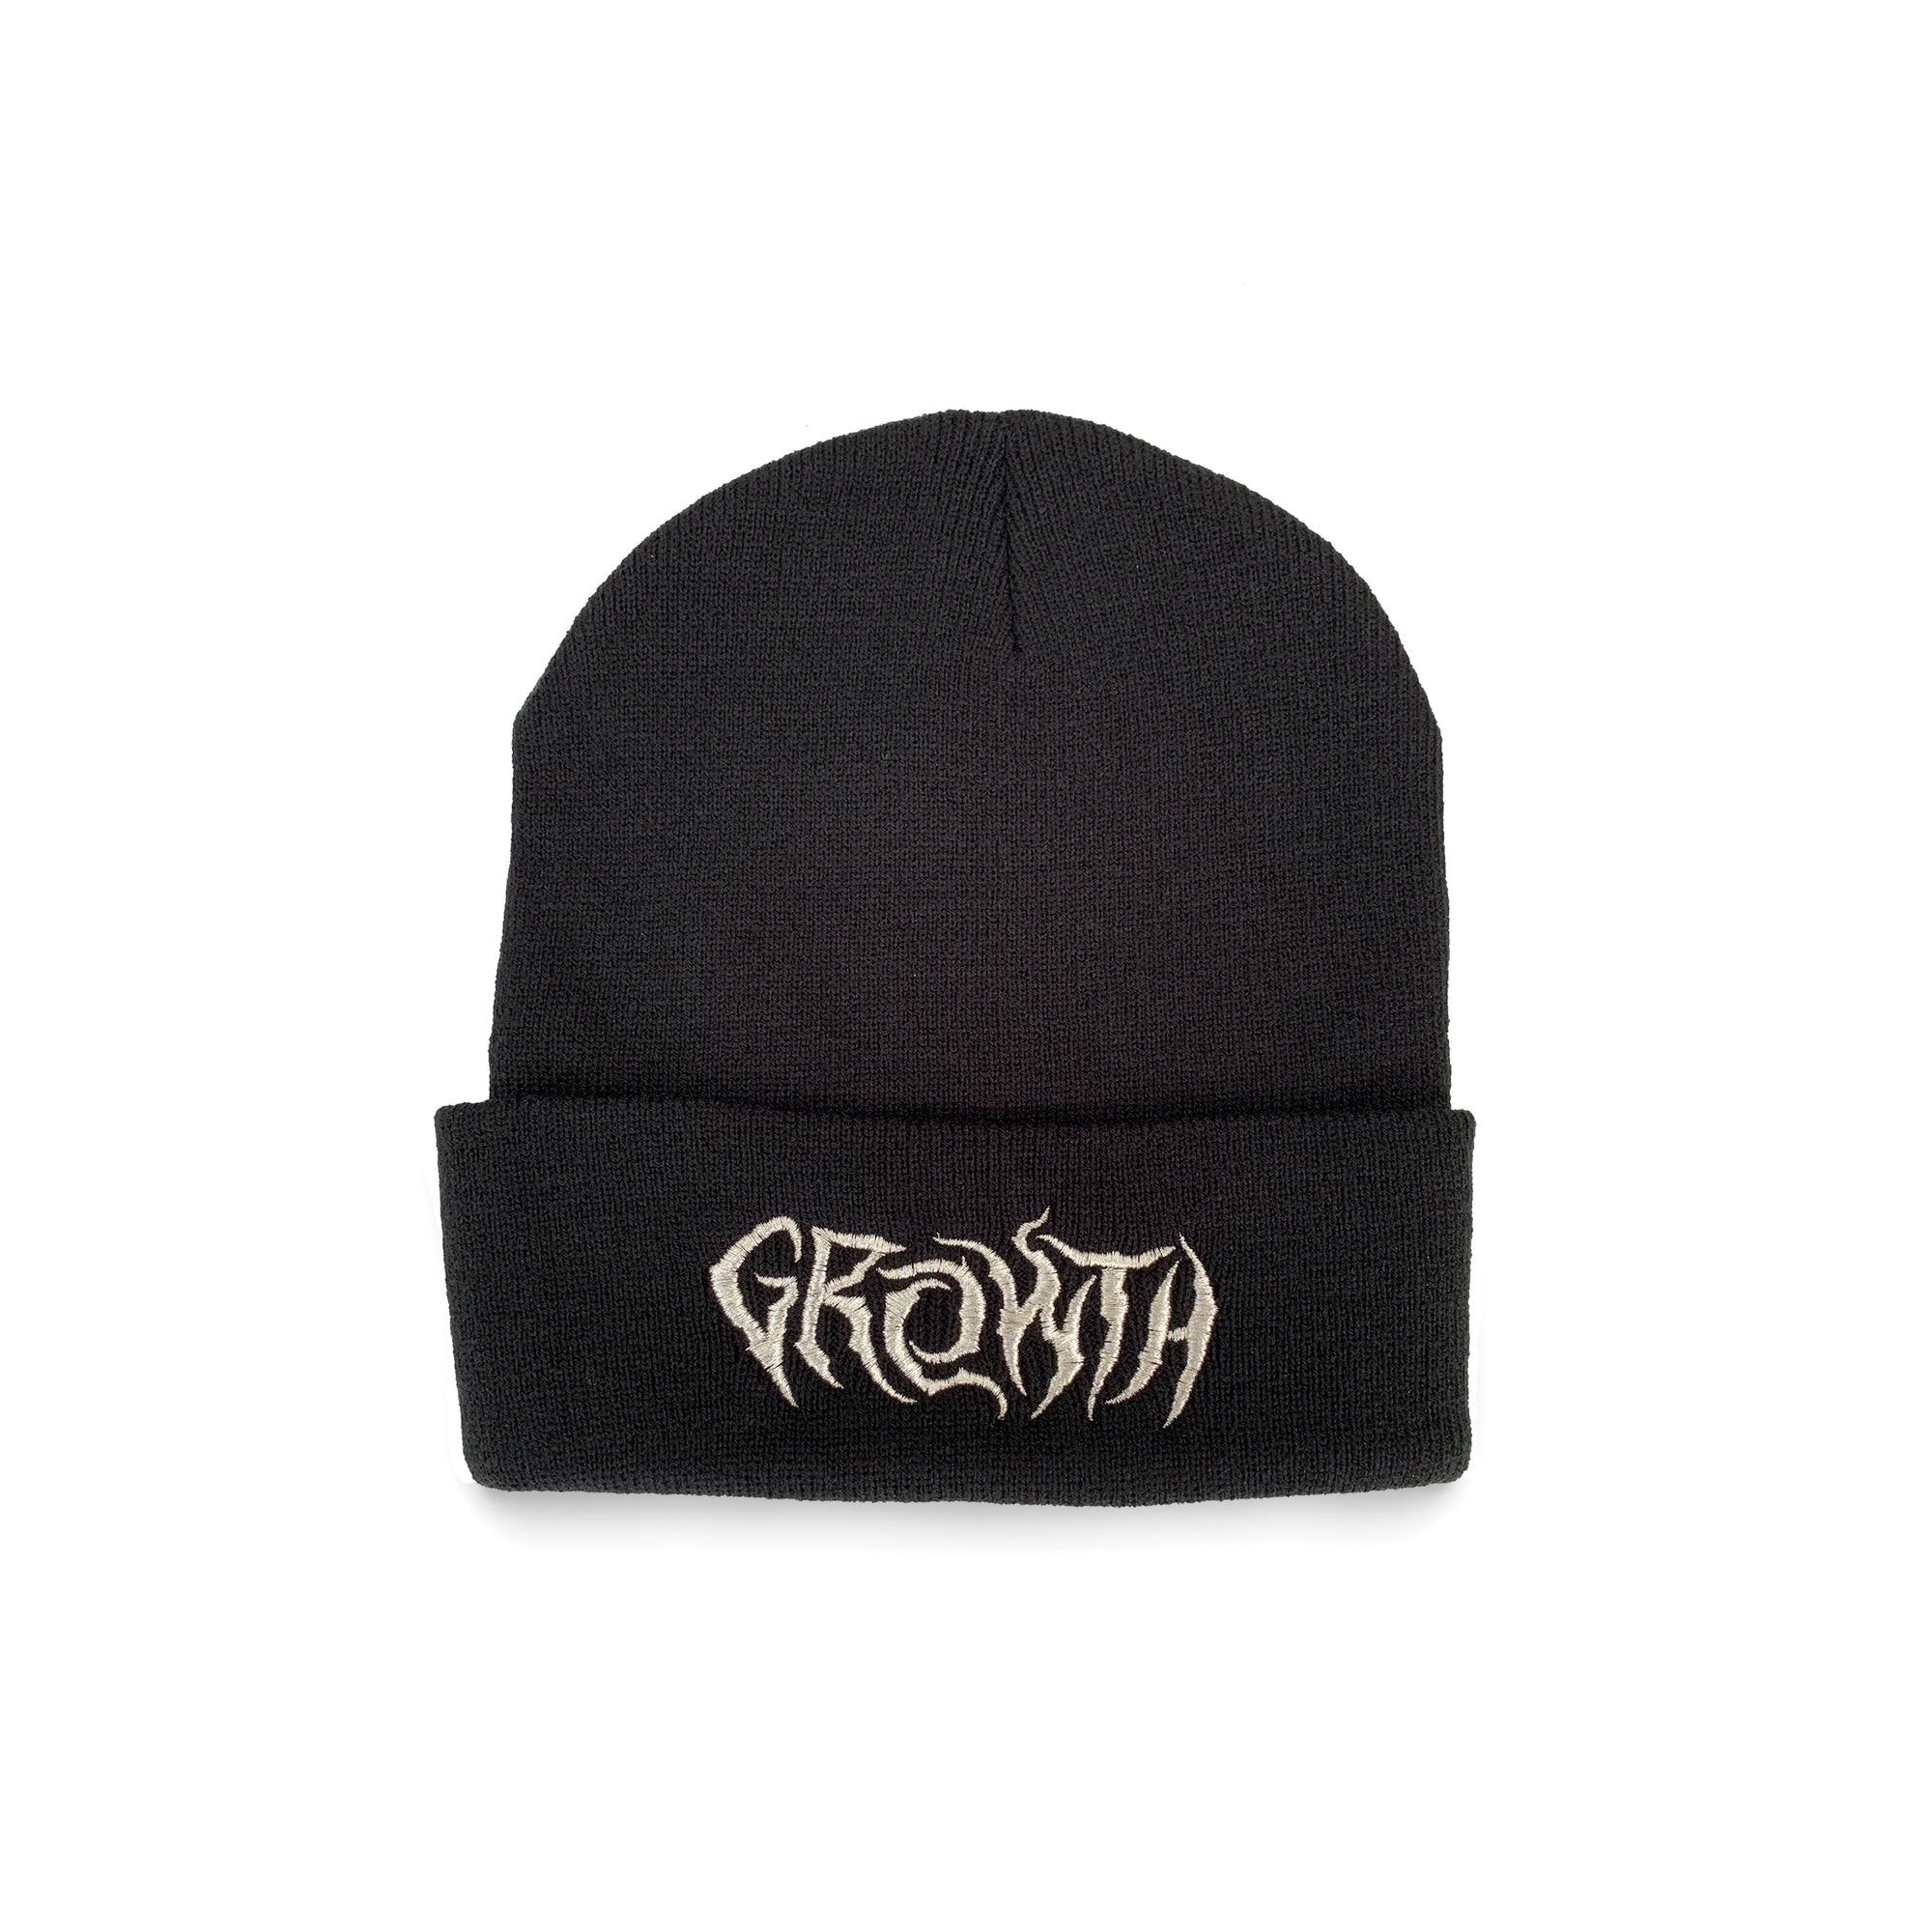 GROWTH // SILVER BEANIE - Wild Thing Records